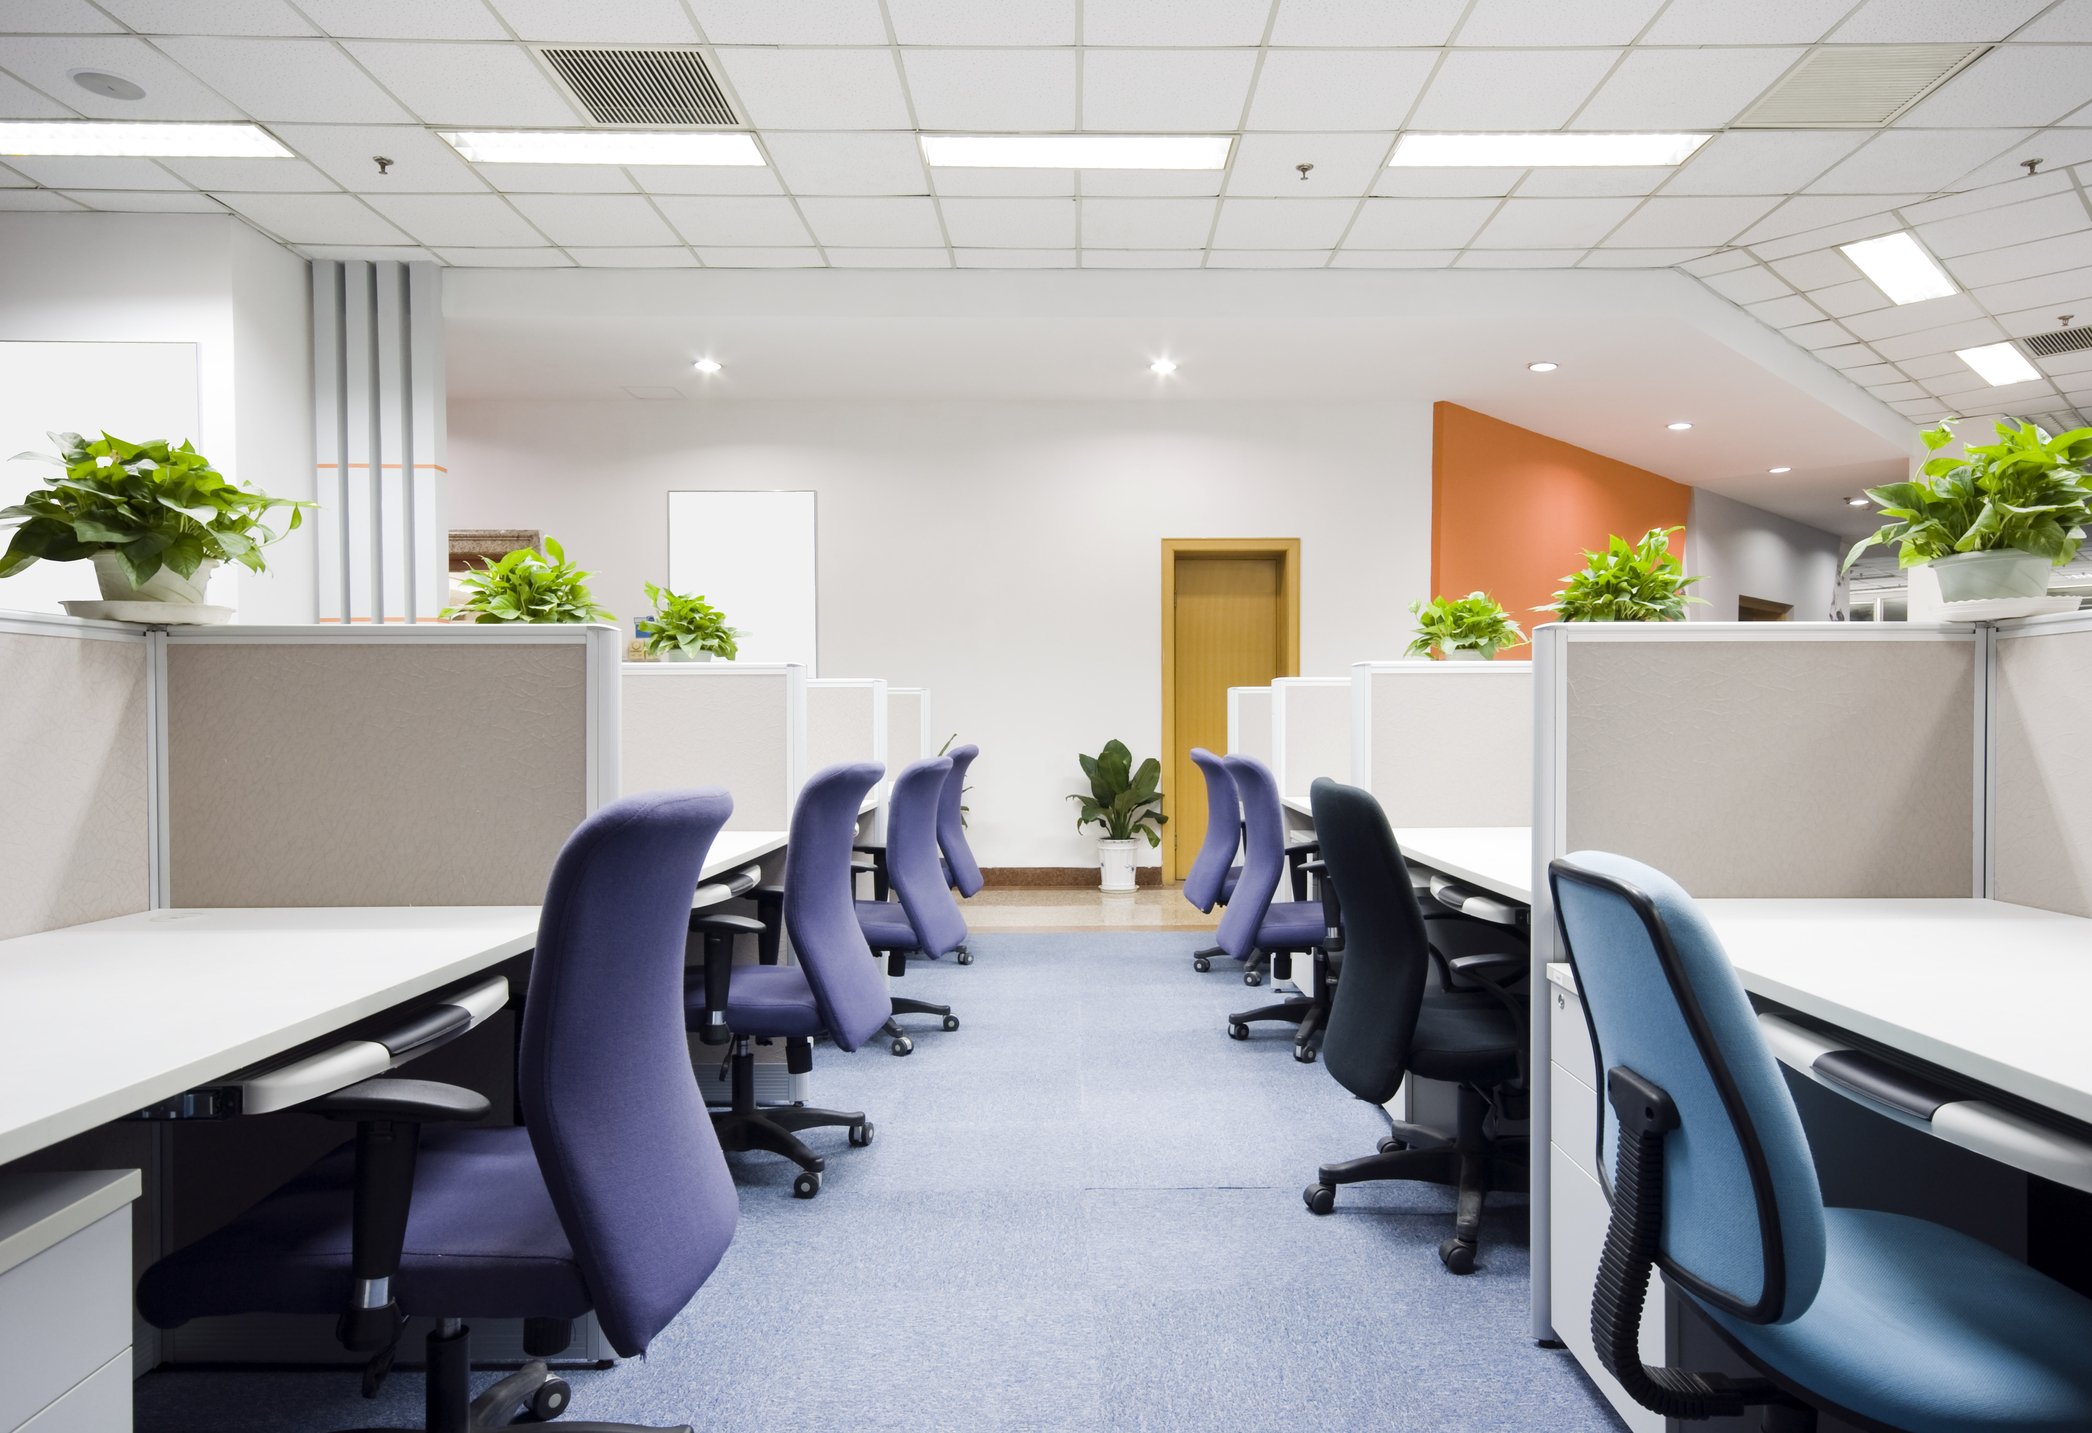 Desk chairs in an office | Types of commercial property finance